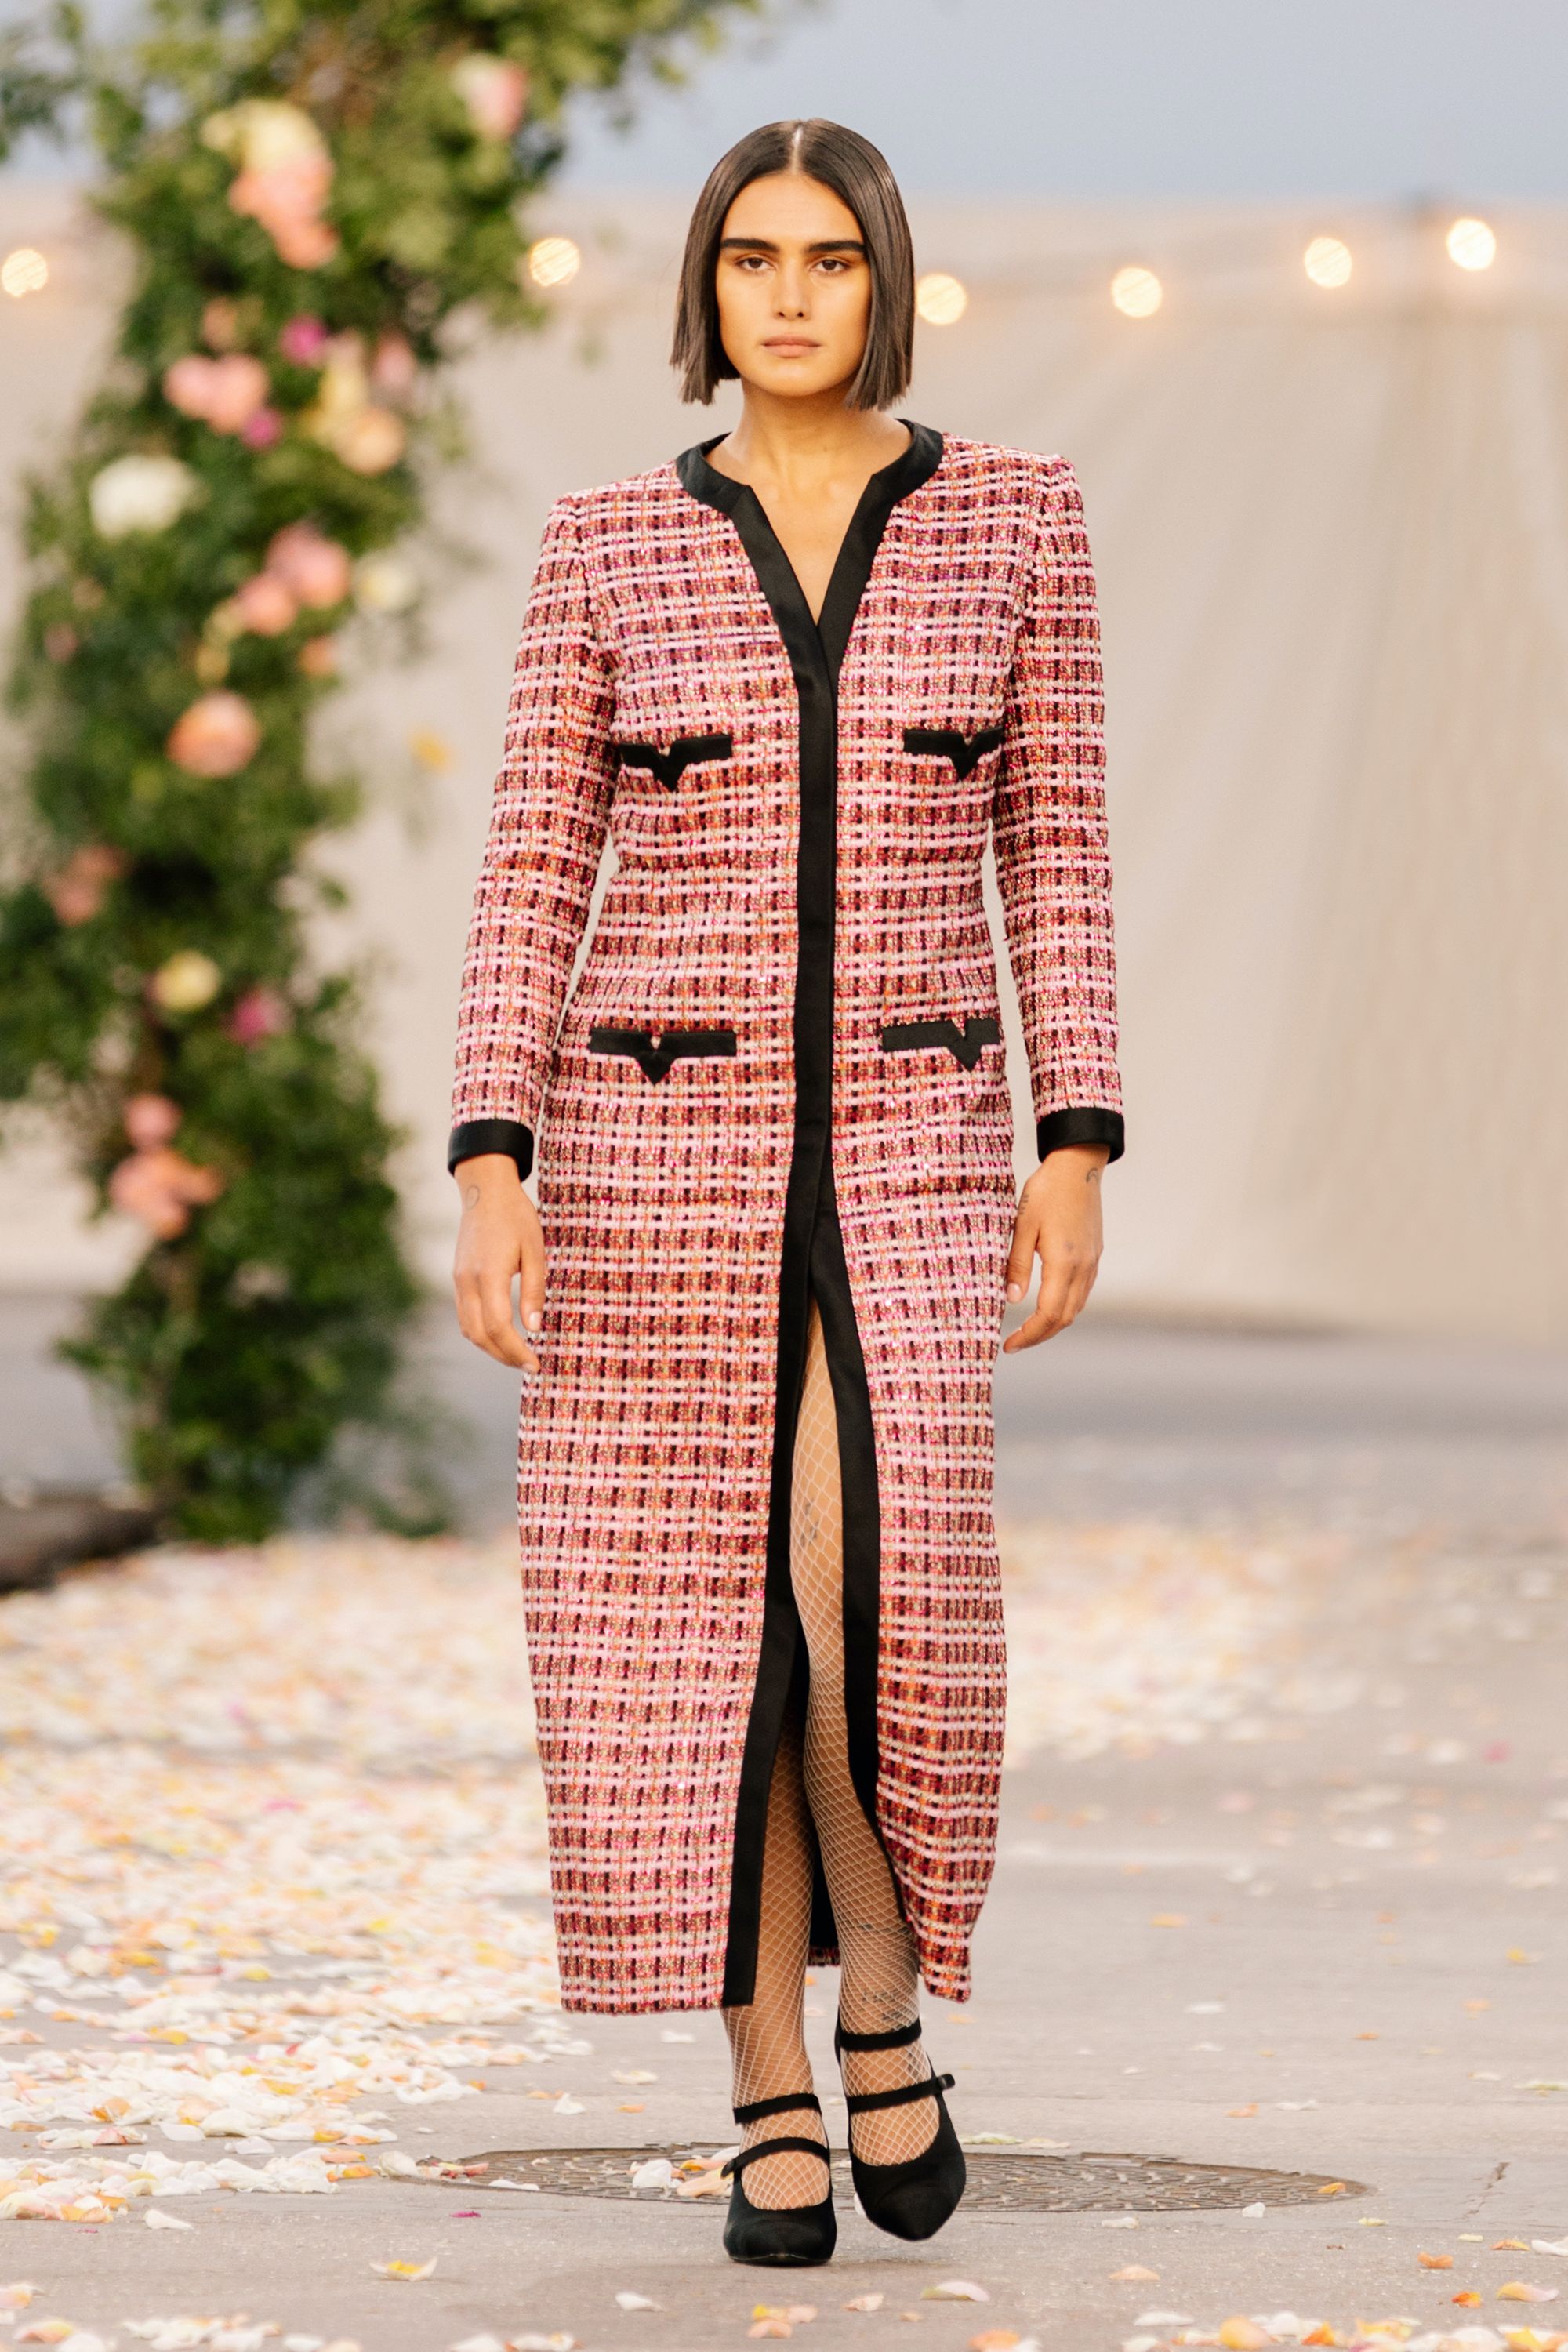 Chanel Spring 2021 Haute Couture - Chanel Haute Couture Fashion Show Spring  2021